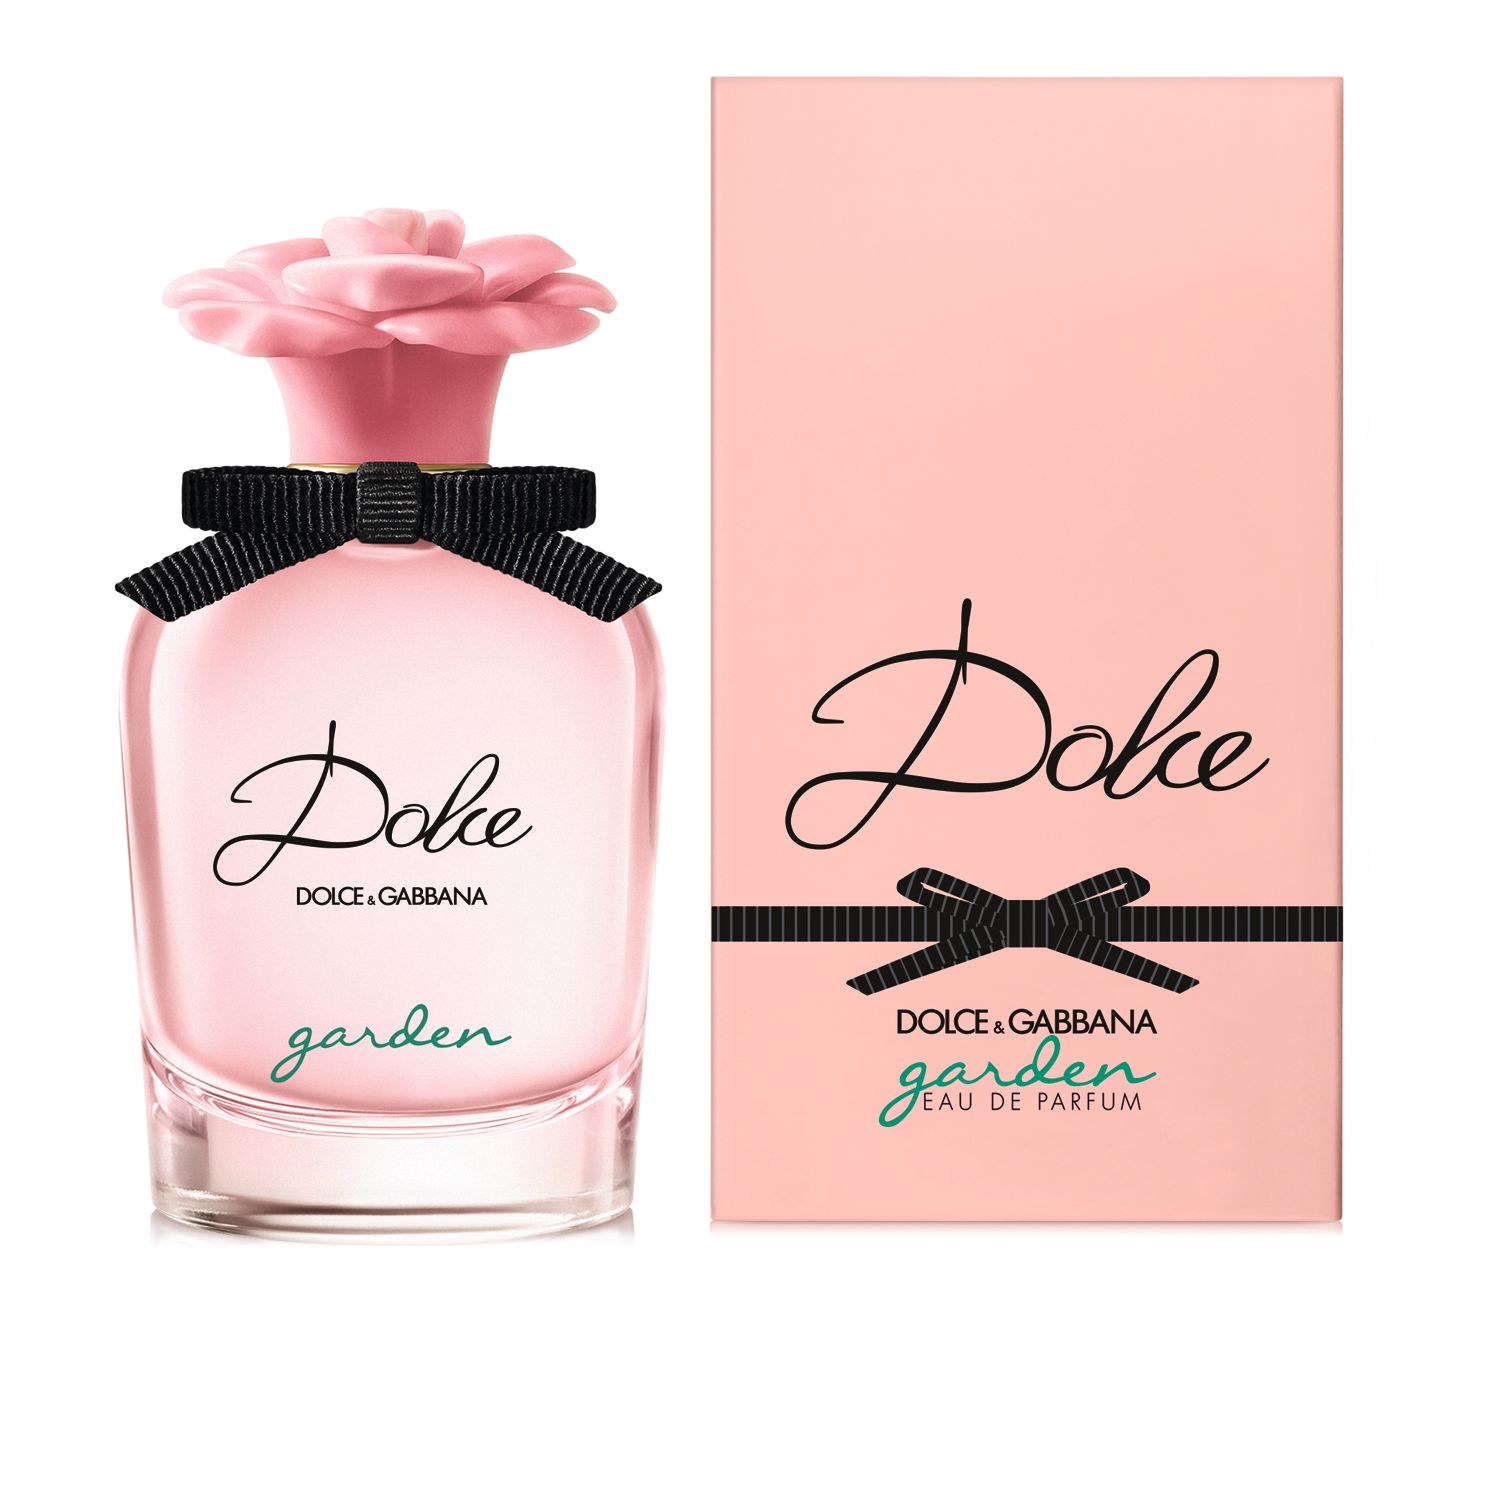 dolce and gabbana floral perfume